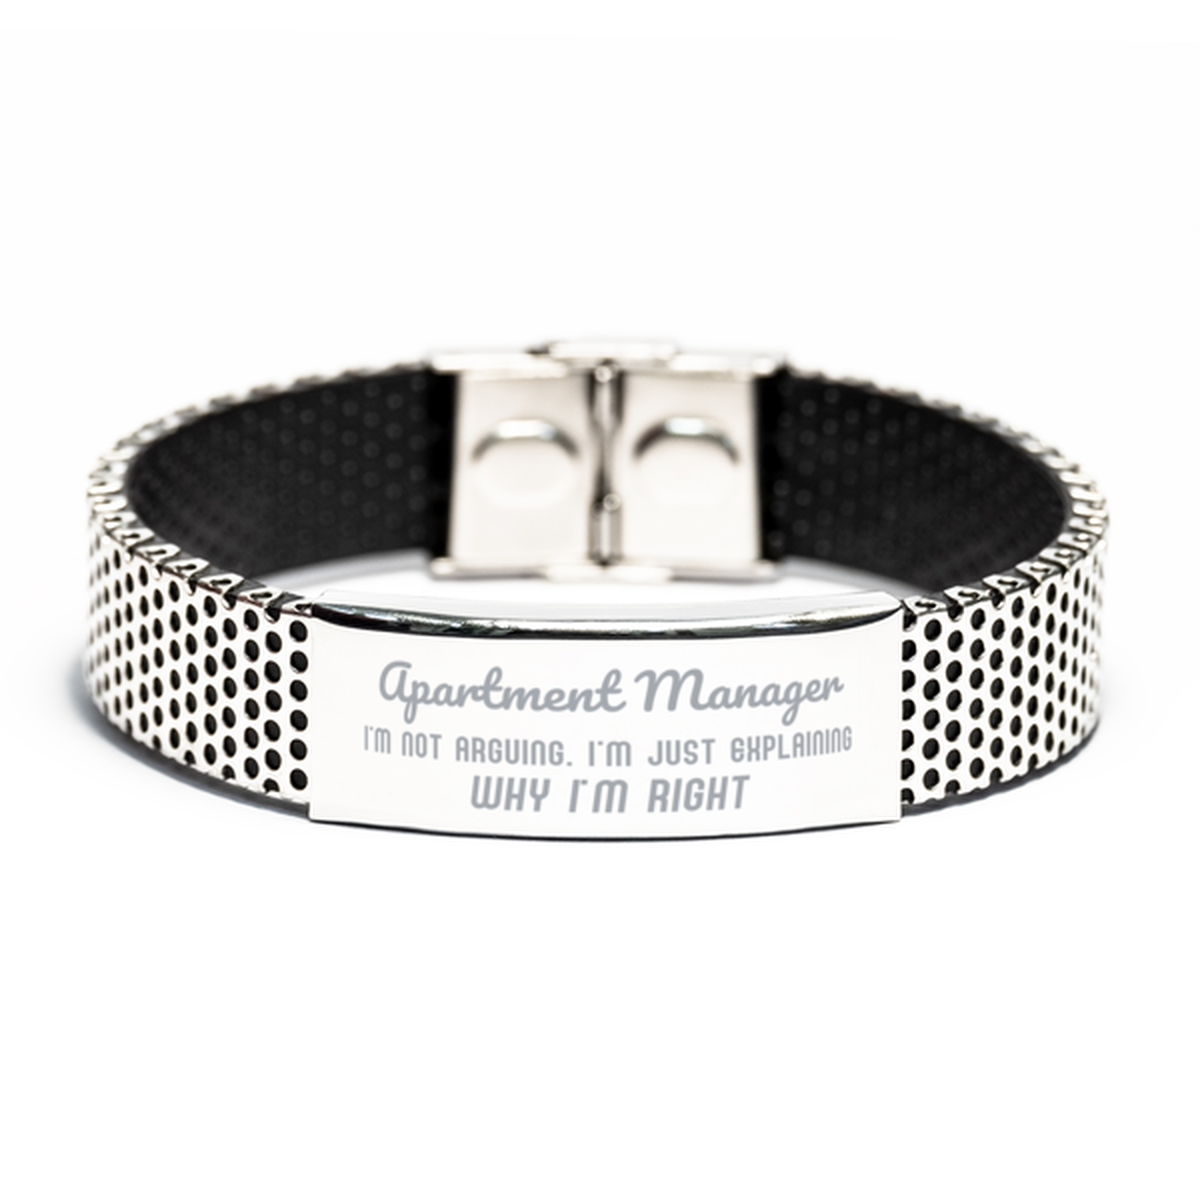 Apartment Manager I'm not Arguing. I'm Just Explaining Why I'm RIGHT Stainless Steel Bracelet, Funny Saying Quote Apartment Manager Gifts For Apartment Manager Graduation Birthday Christmas Gifts for Men Women Coworker